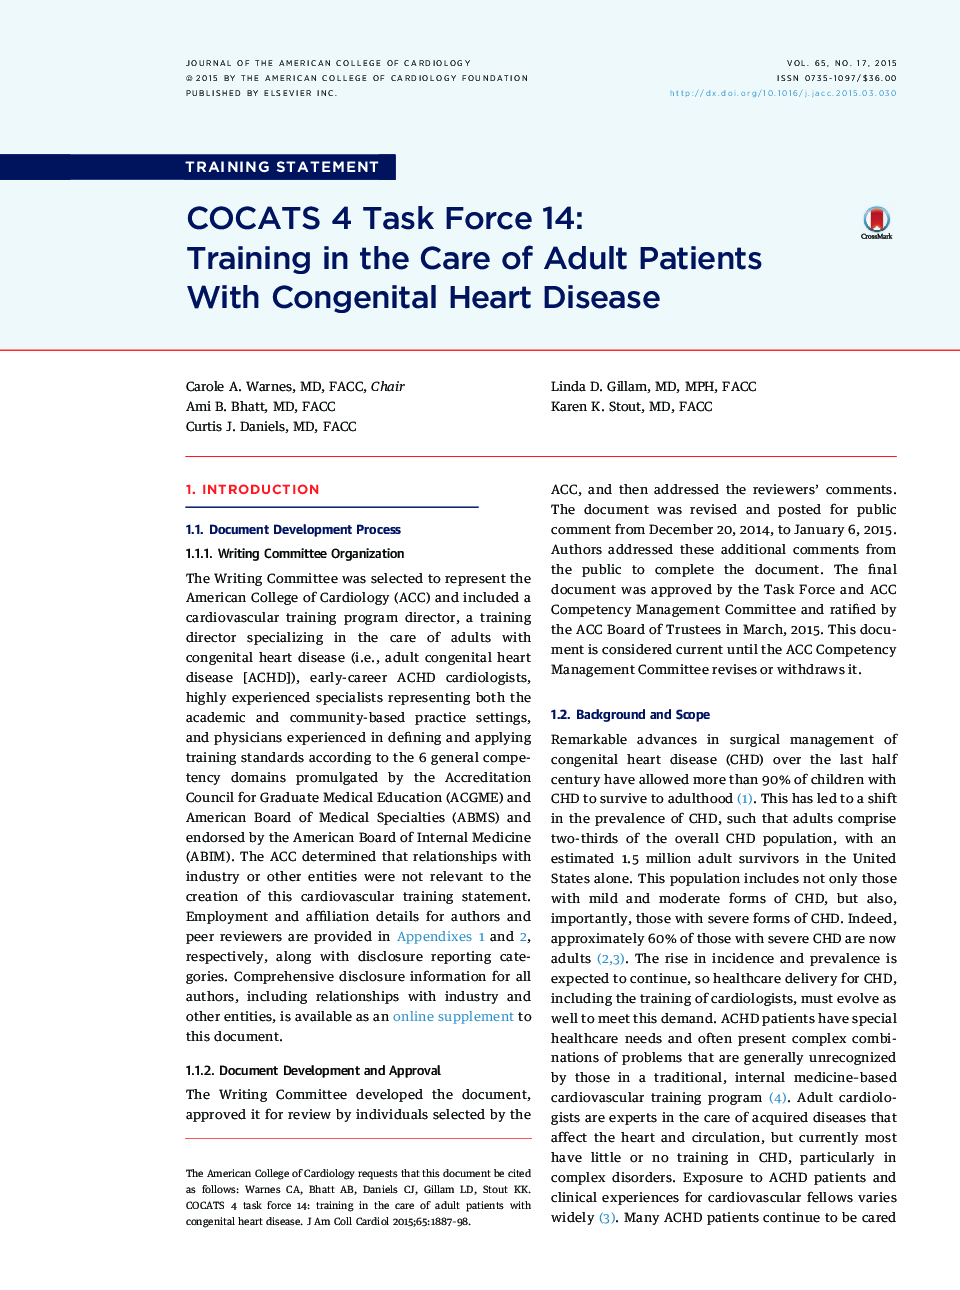 COCATS 4 Task Force 14: Training inÂ theÂ Care of Adult Patients With Congenital Heart Disease